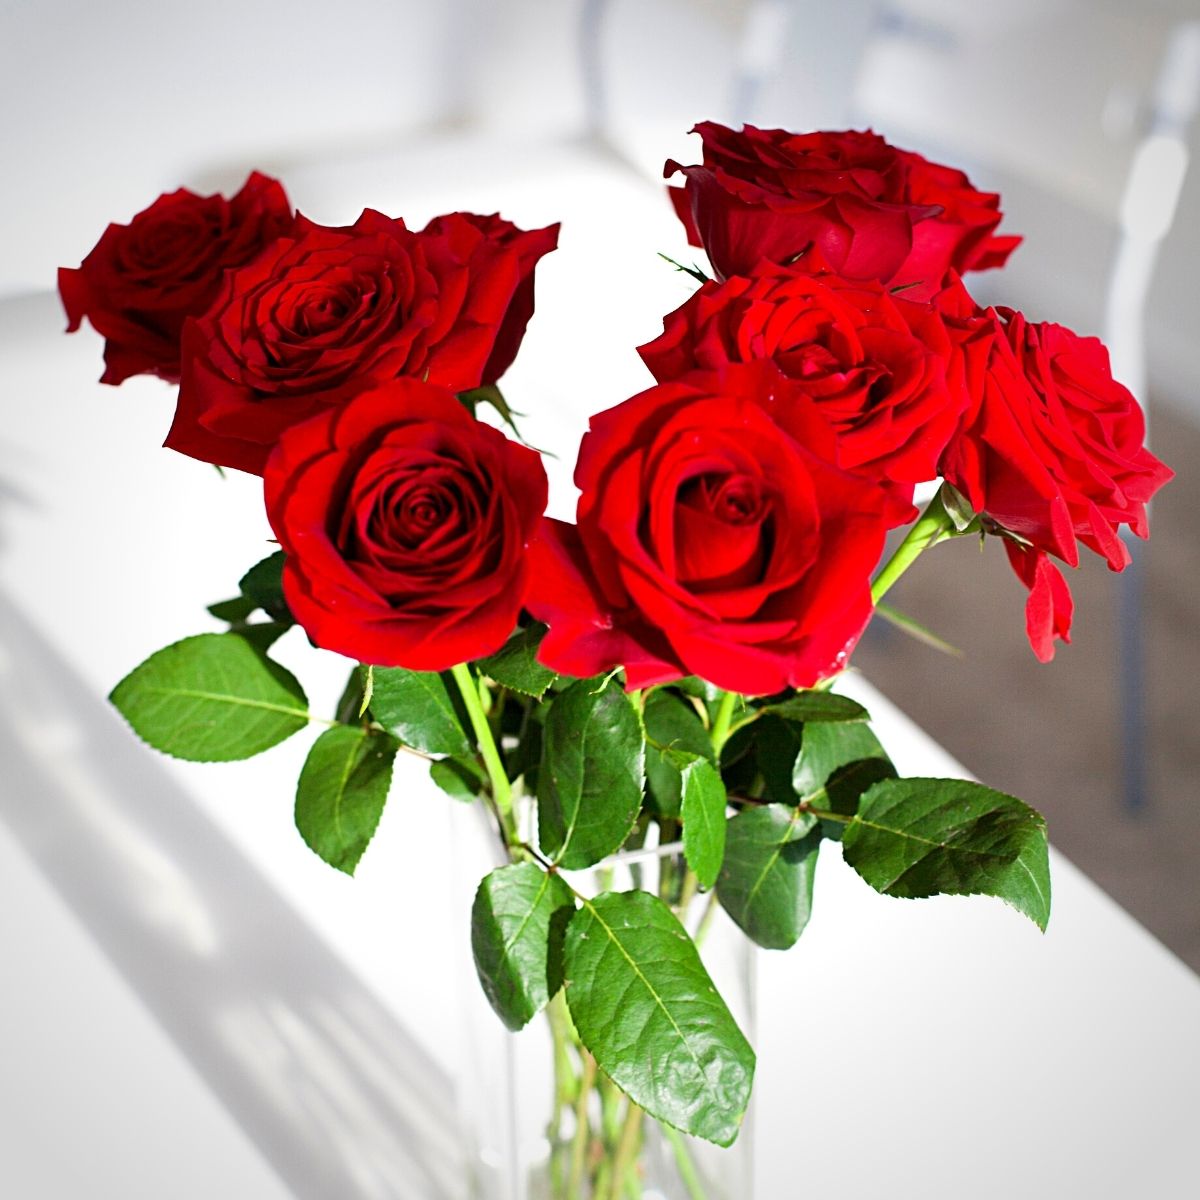 celebrating national red rose day with red roses